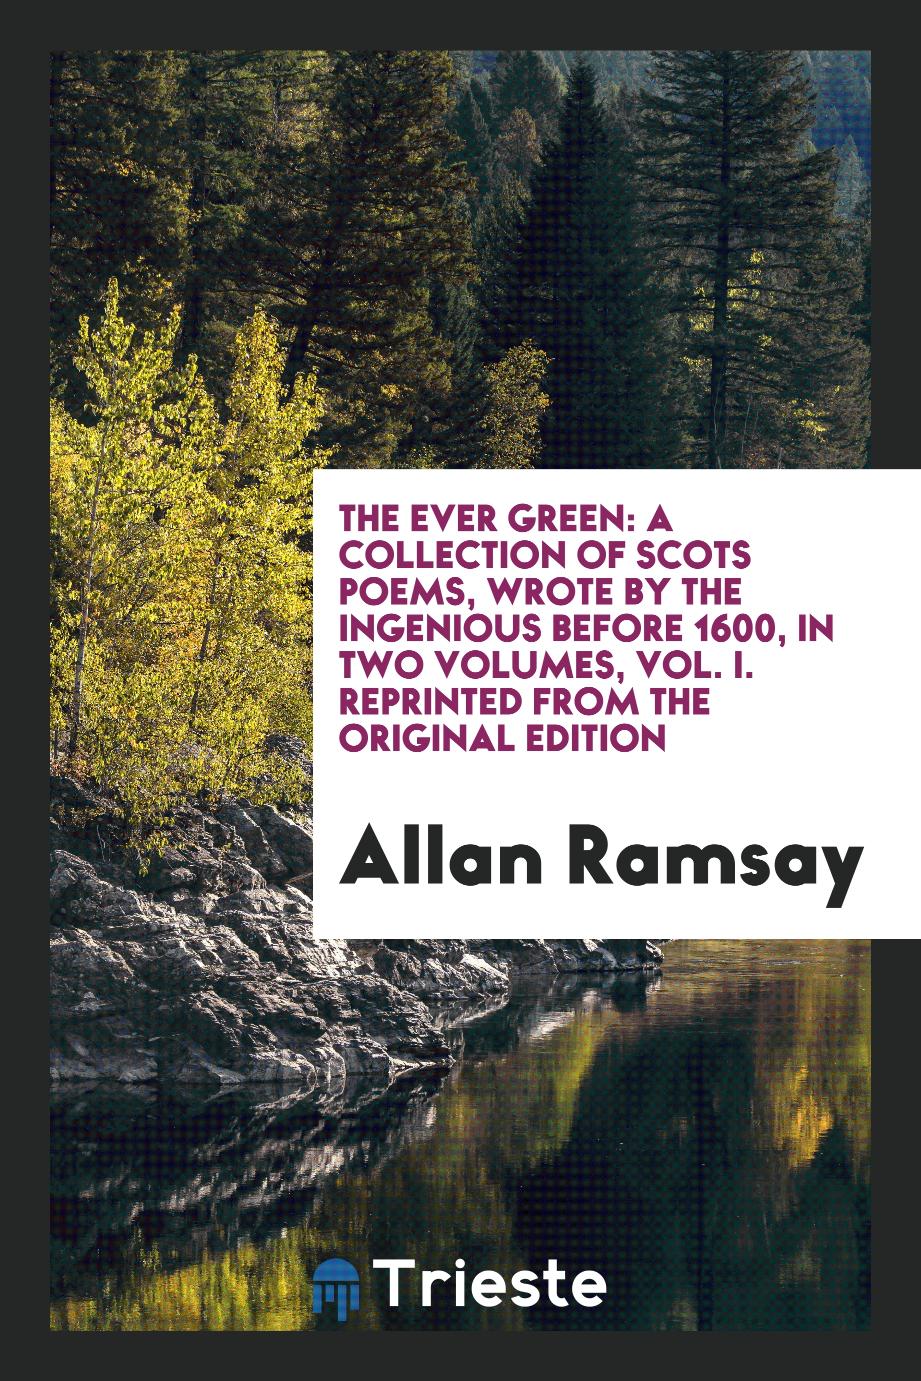 The Ever Green: A Collection of Scots Poems, Wrote by the Ingenious Before 1600, in Two Volumes, Vol. I. Reprinted from the Original Edition